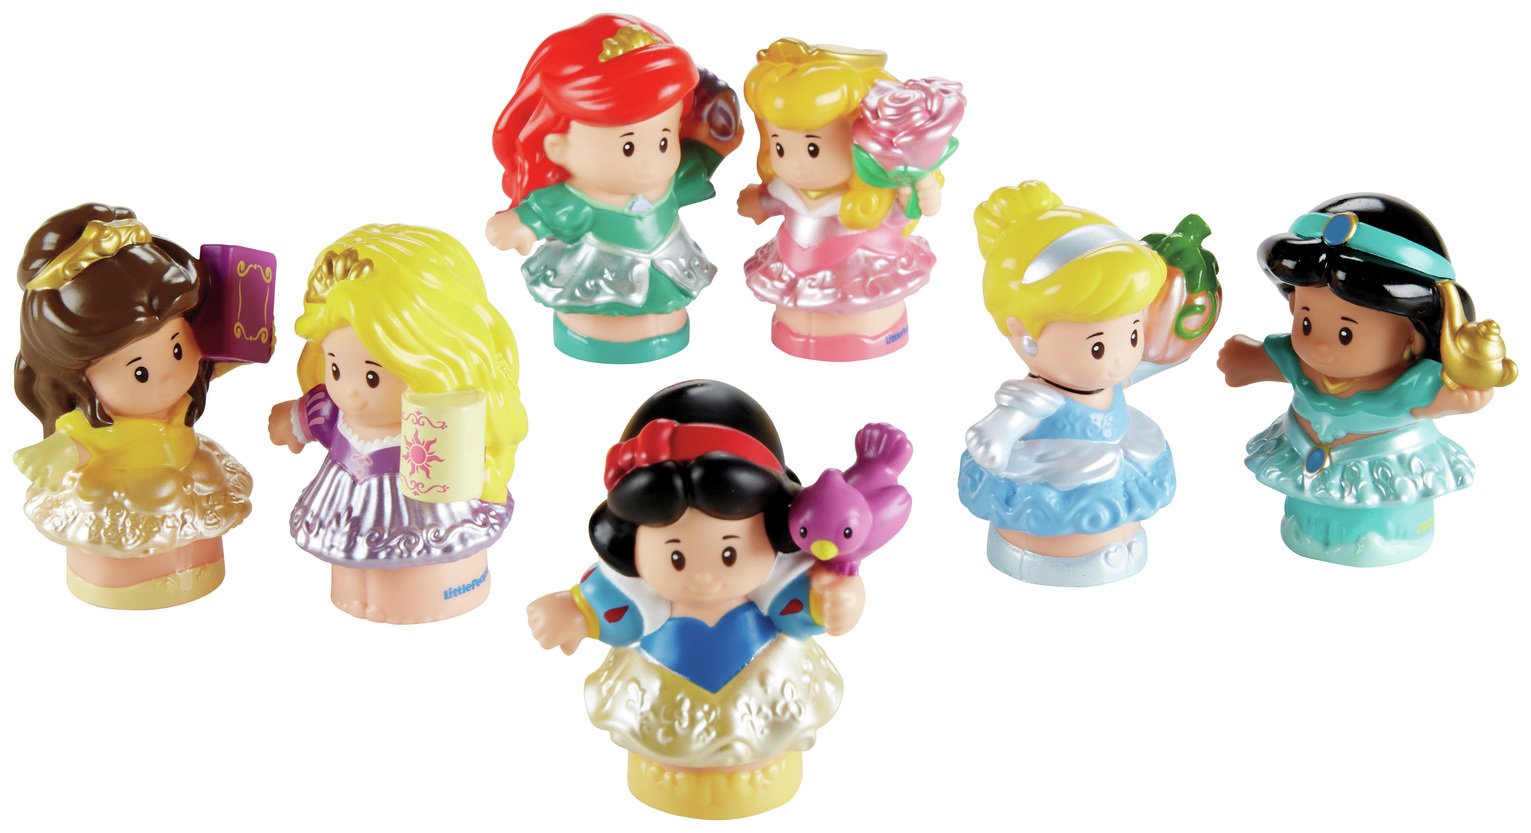 Fisher-Price Little People Disney Princess Figures - 7 Pack